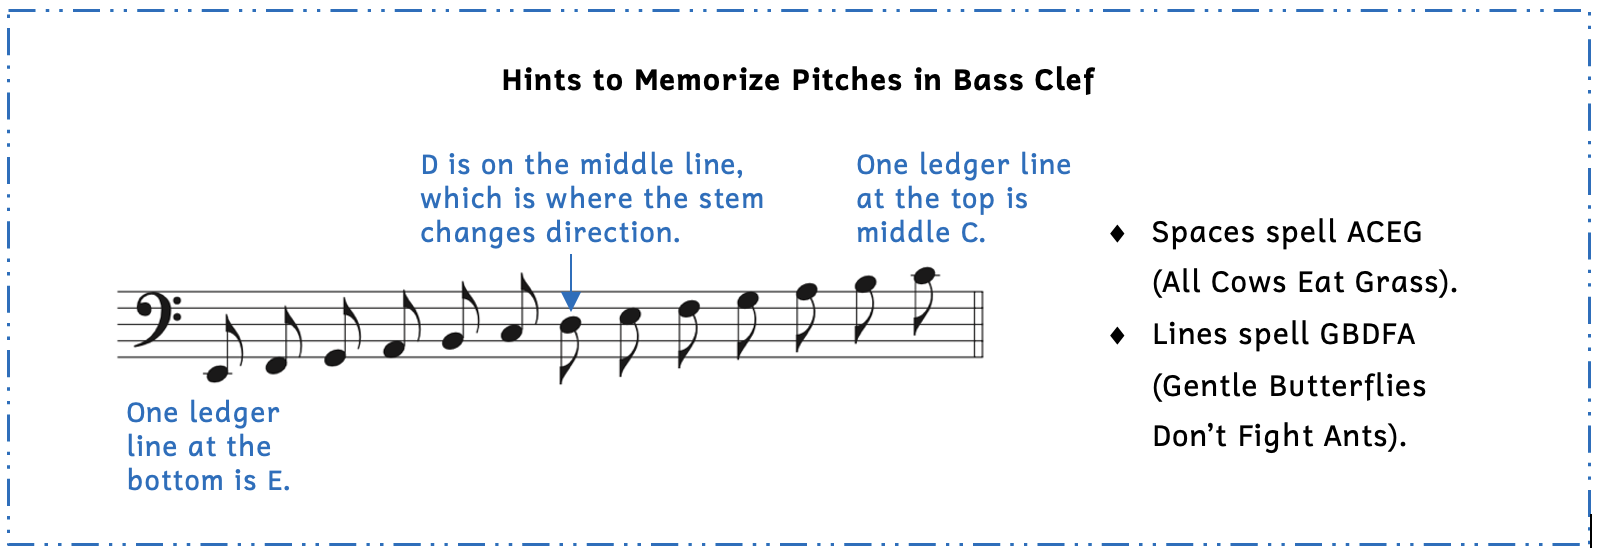 Summary box with hints to memorize pitches in bass clef are shown. One ledger line below the staff is E. The eighth note on E has a stem that is to the right of the notehead and is pointed up. The flag is also to the right. Notes ascending from E continue to have stems pointing up until D, which falls on the middle line. The stem is to the left of the notehead and is pointed down, but the flag is still to the right. Notes ascending from D continue to have stems pointing down until middle C, which is located one ledger line above the staff. The spaces of the staff in bass clef spell A, C, E, G, and the lines spell G, B, D, F, A, or Gentle Butterflies Don't Fight Ants.